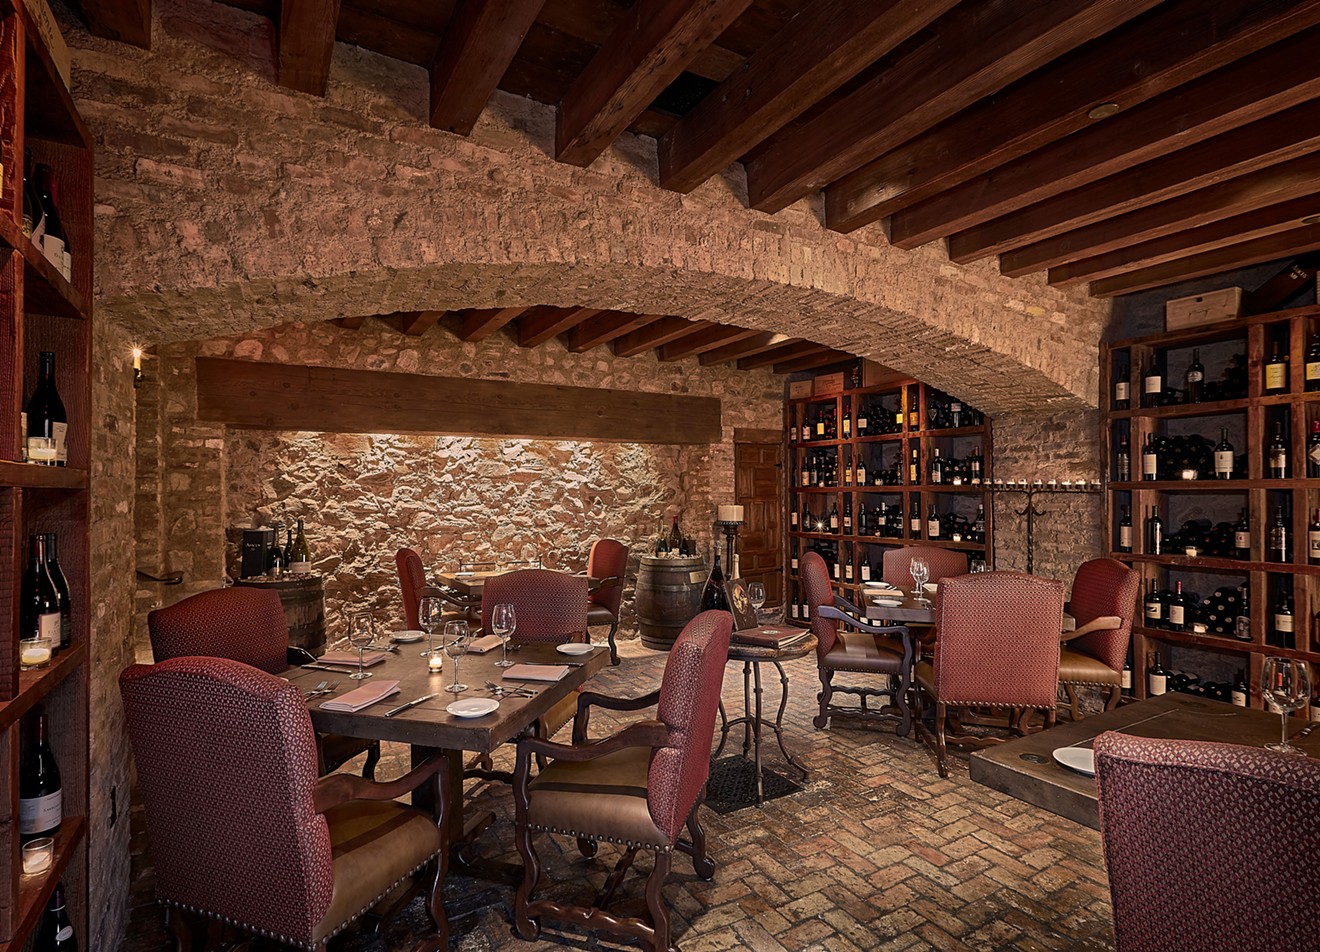 Dinner in the cellar has never been so cool.